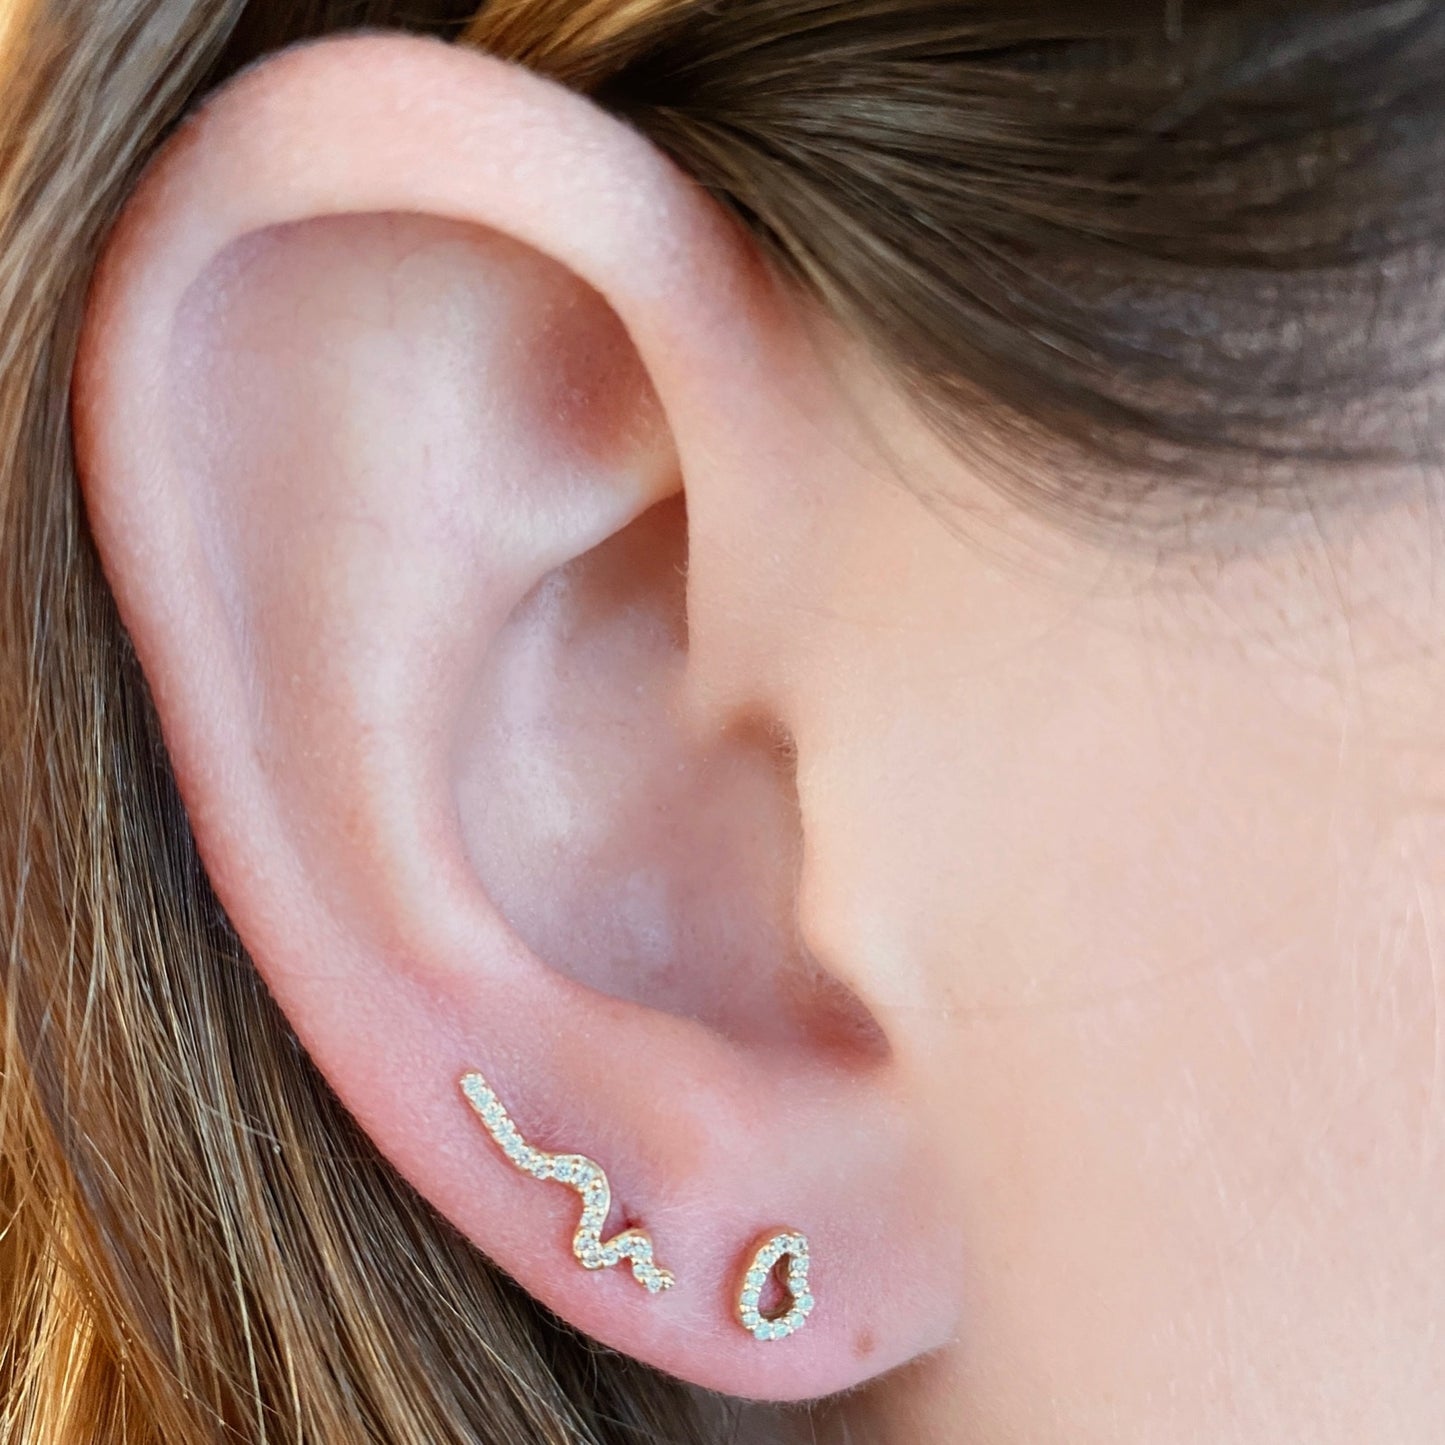 14k gold Full Pave Small Ripple Climber Earring styled on a ear